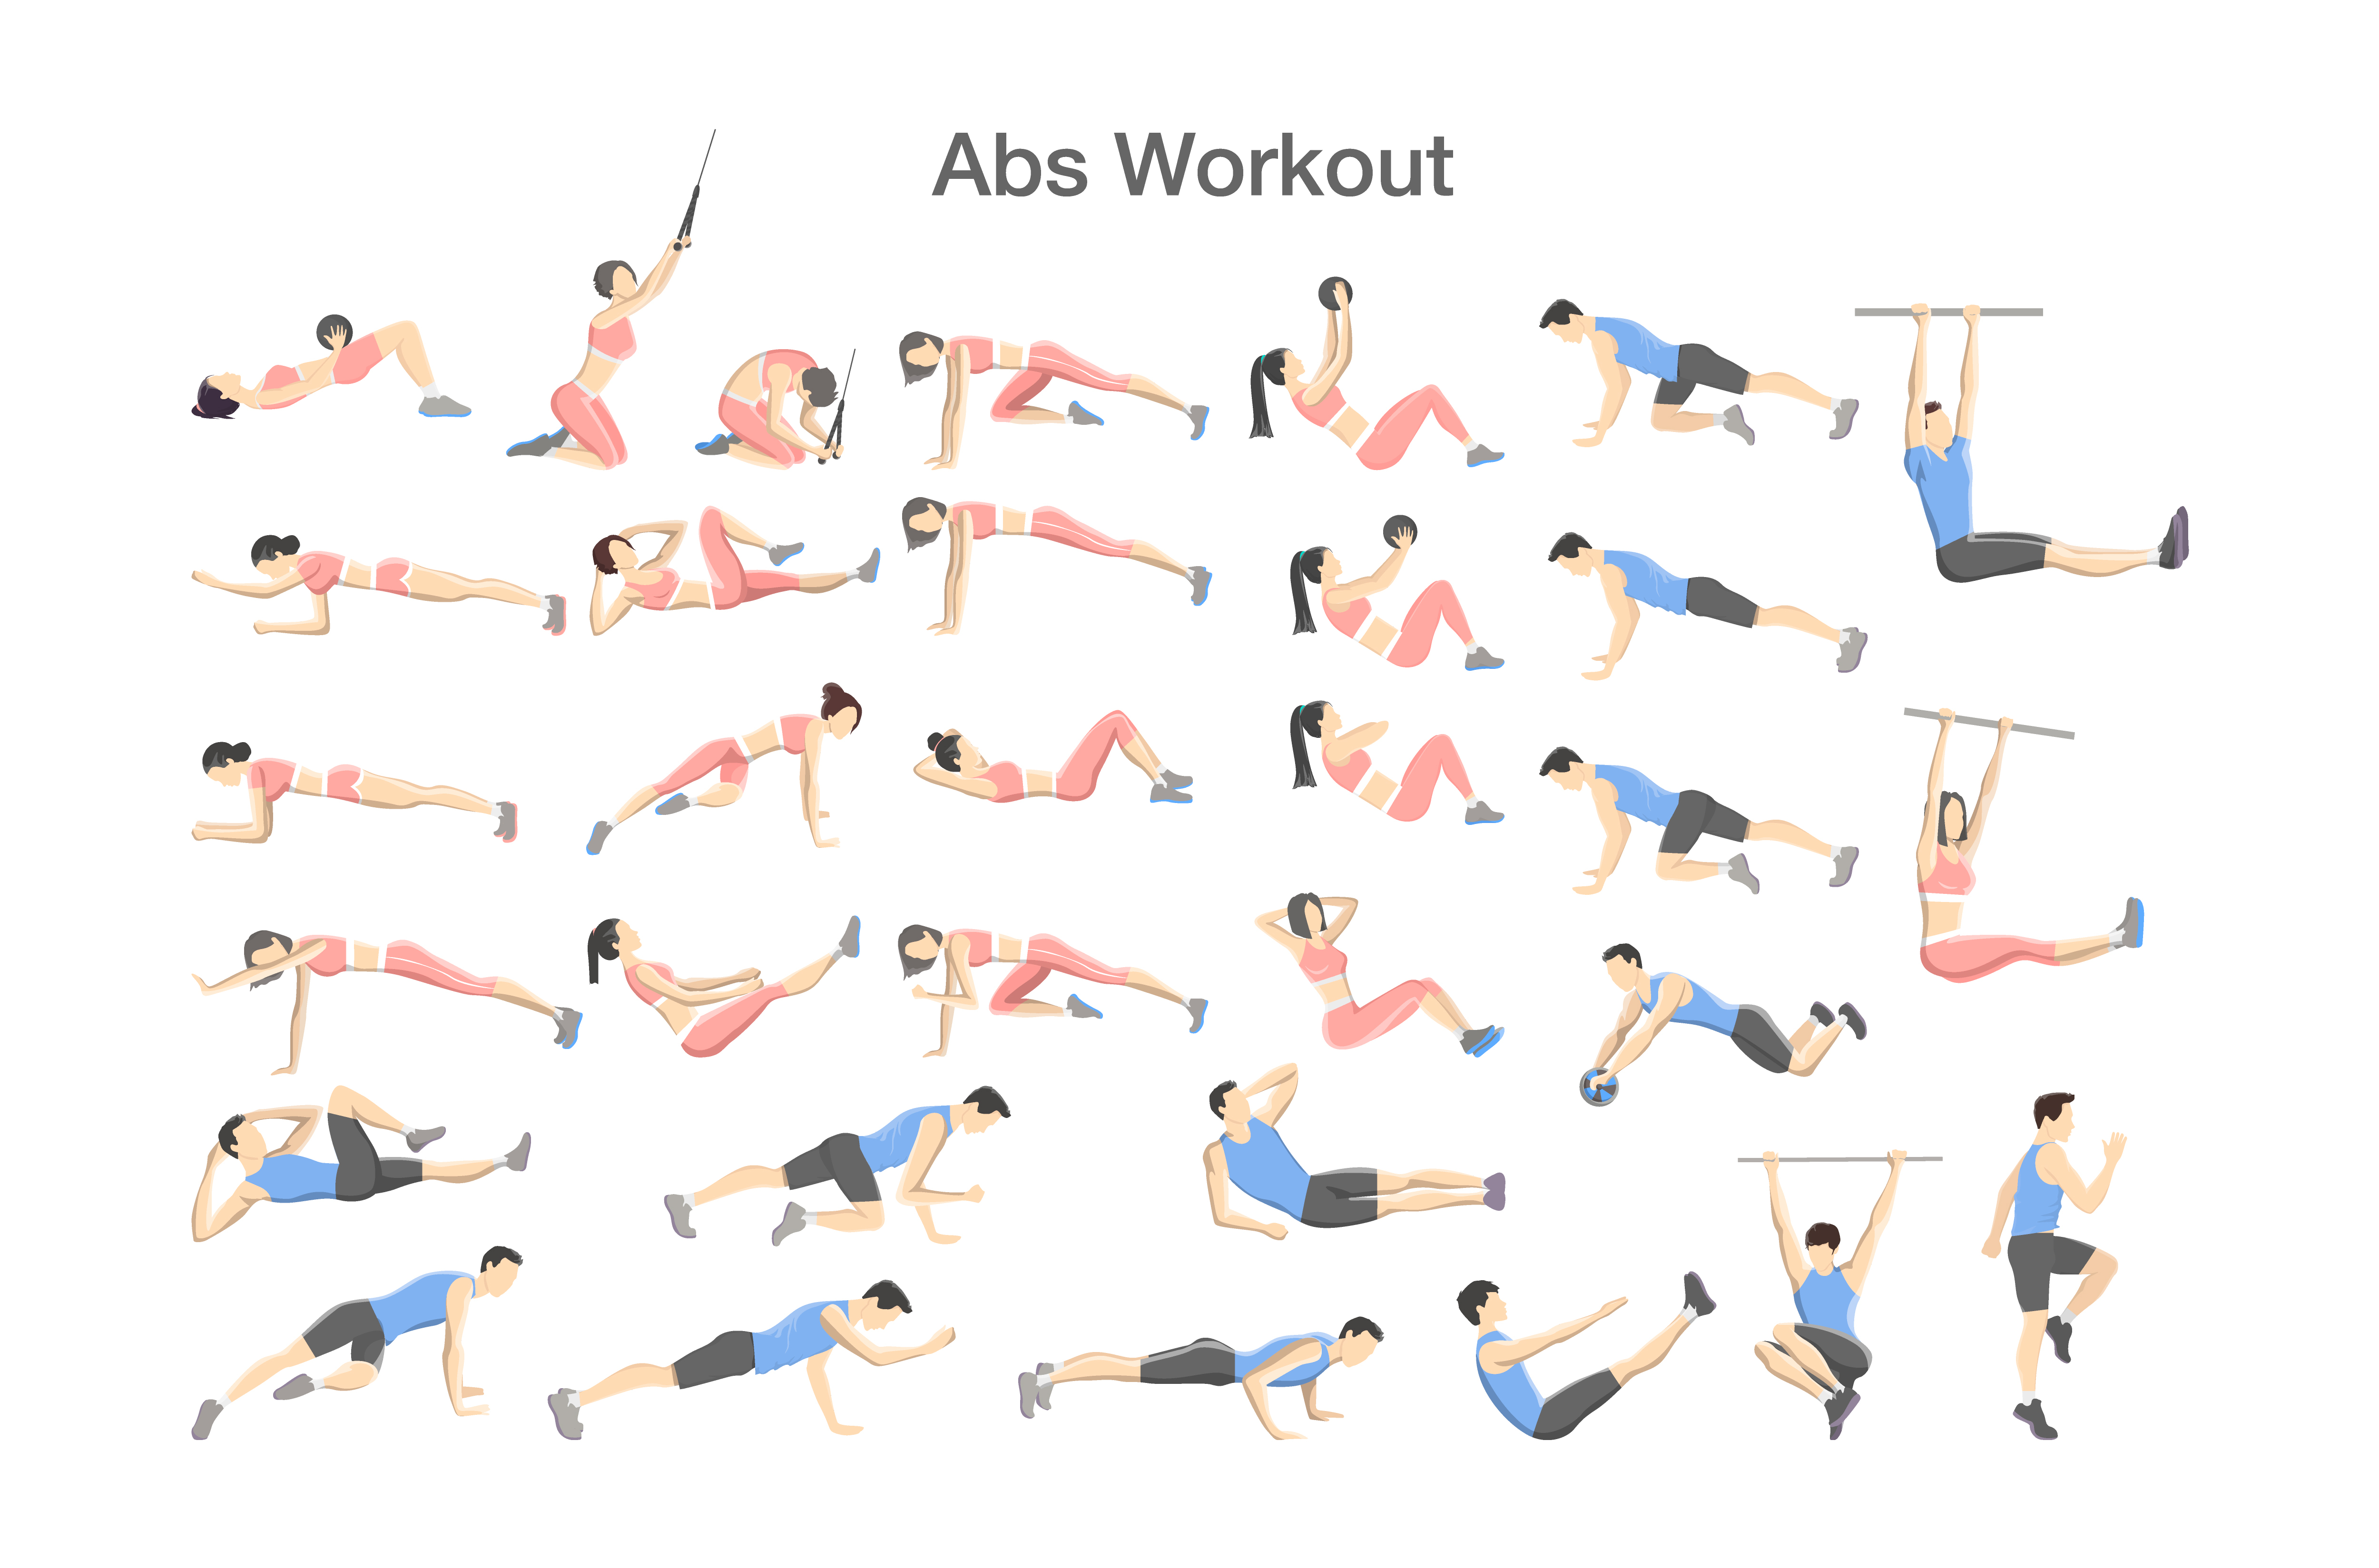 Some ideas for ABS workout routine!